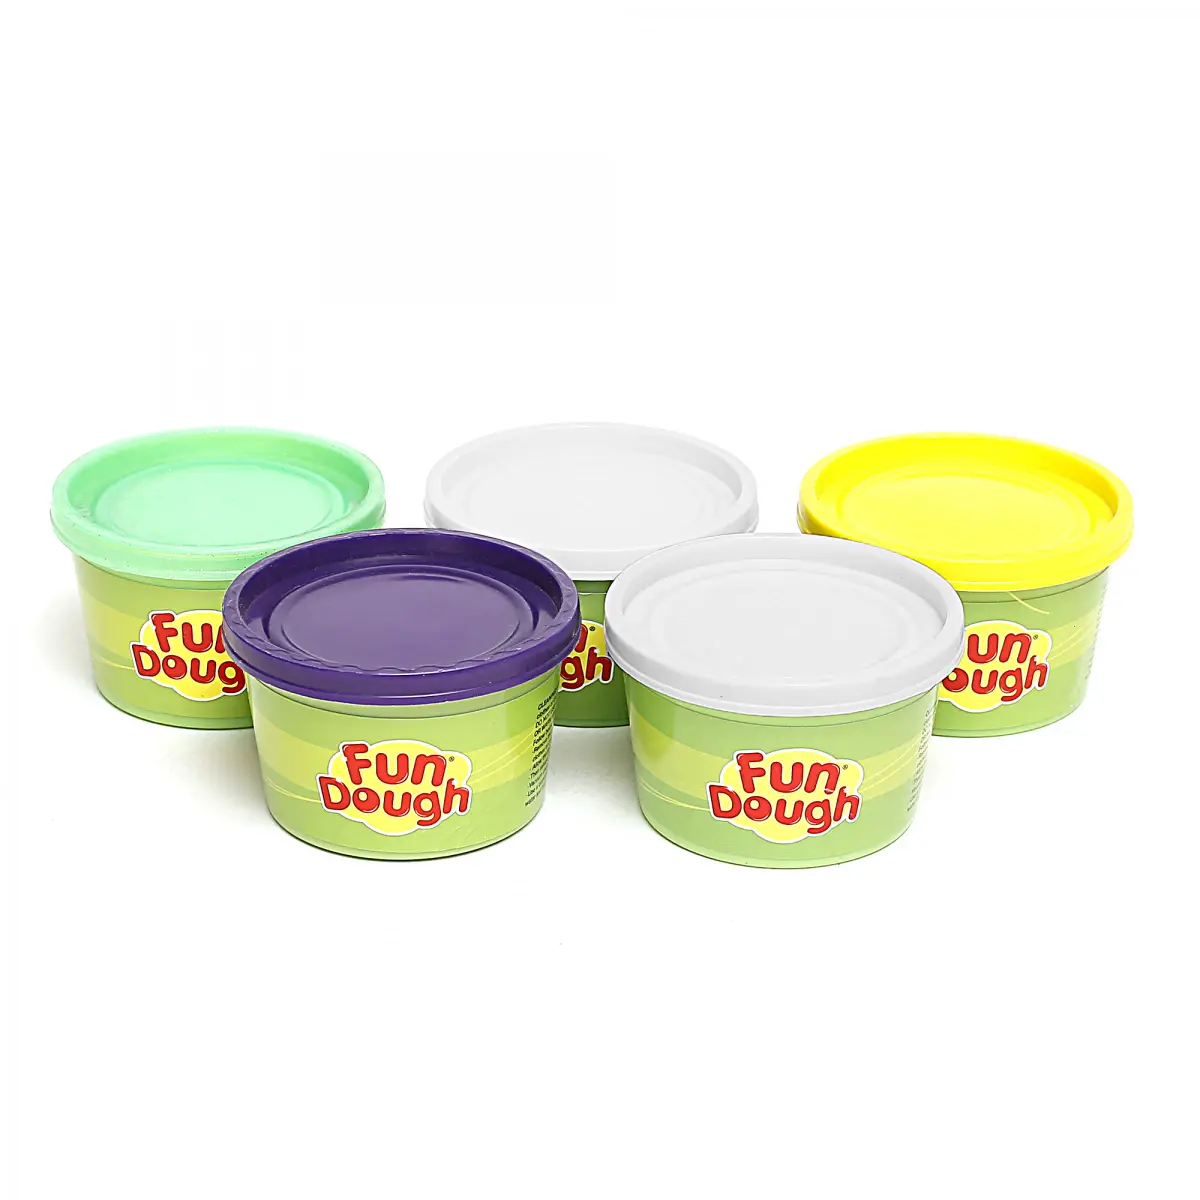 Funskool Fun Dough Space Jam with 5 tubs of 75g each & Accessories, 12M+, Multicolour